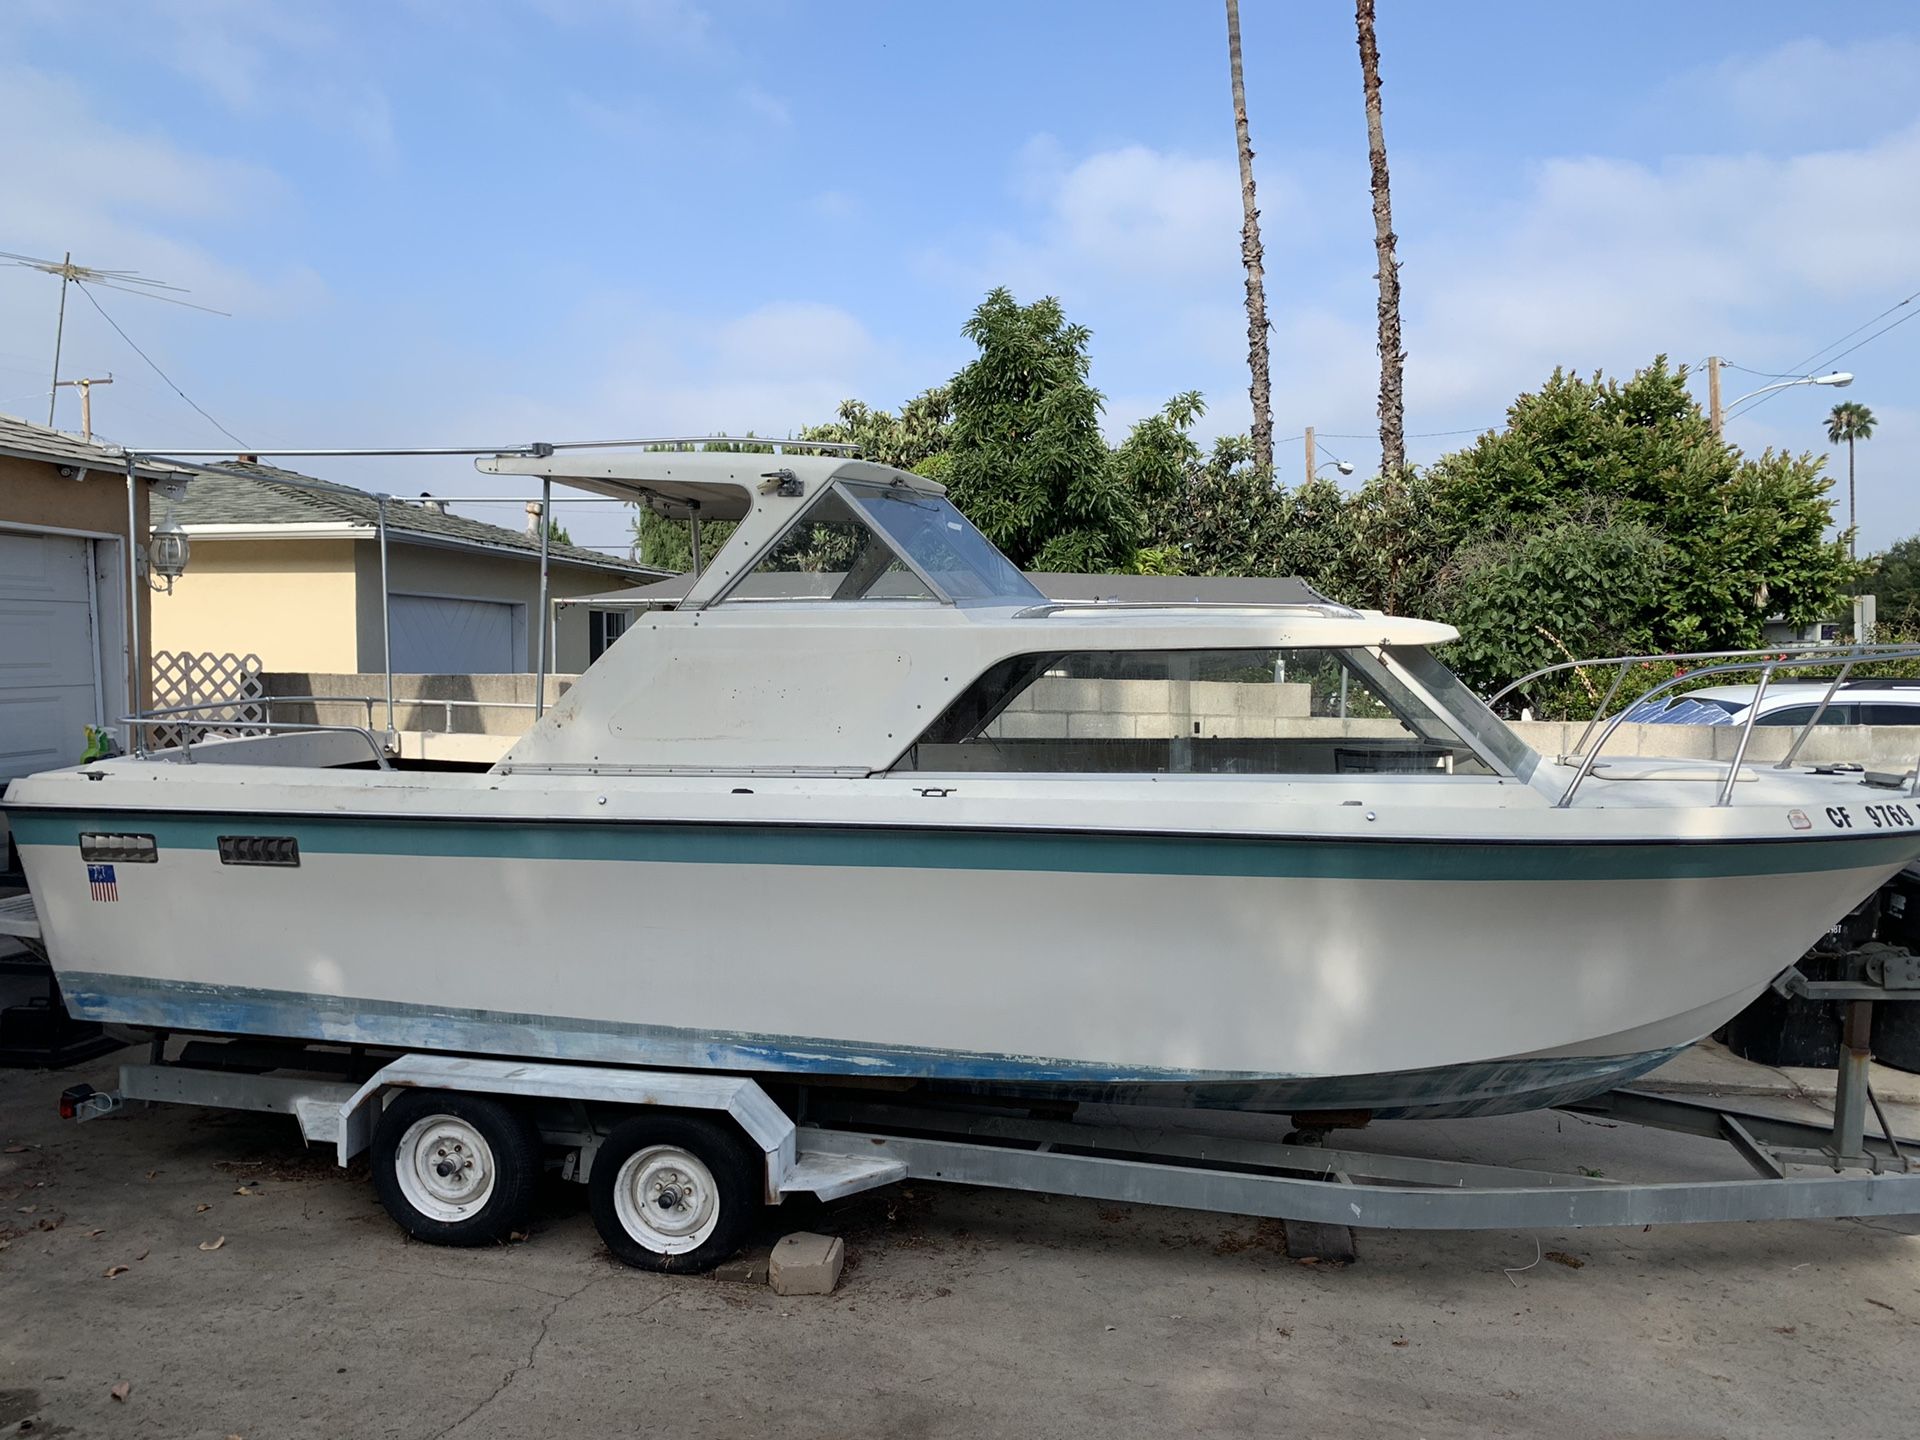 27 foot SabreCraft Boat with trailer, Volvo outboard and 351w